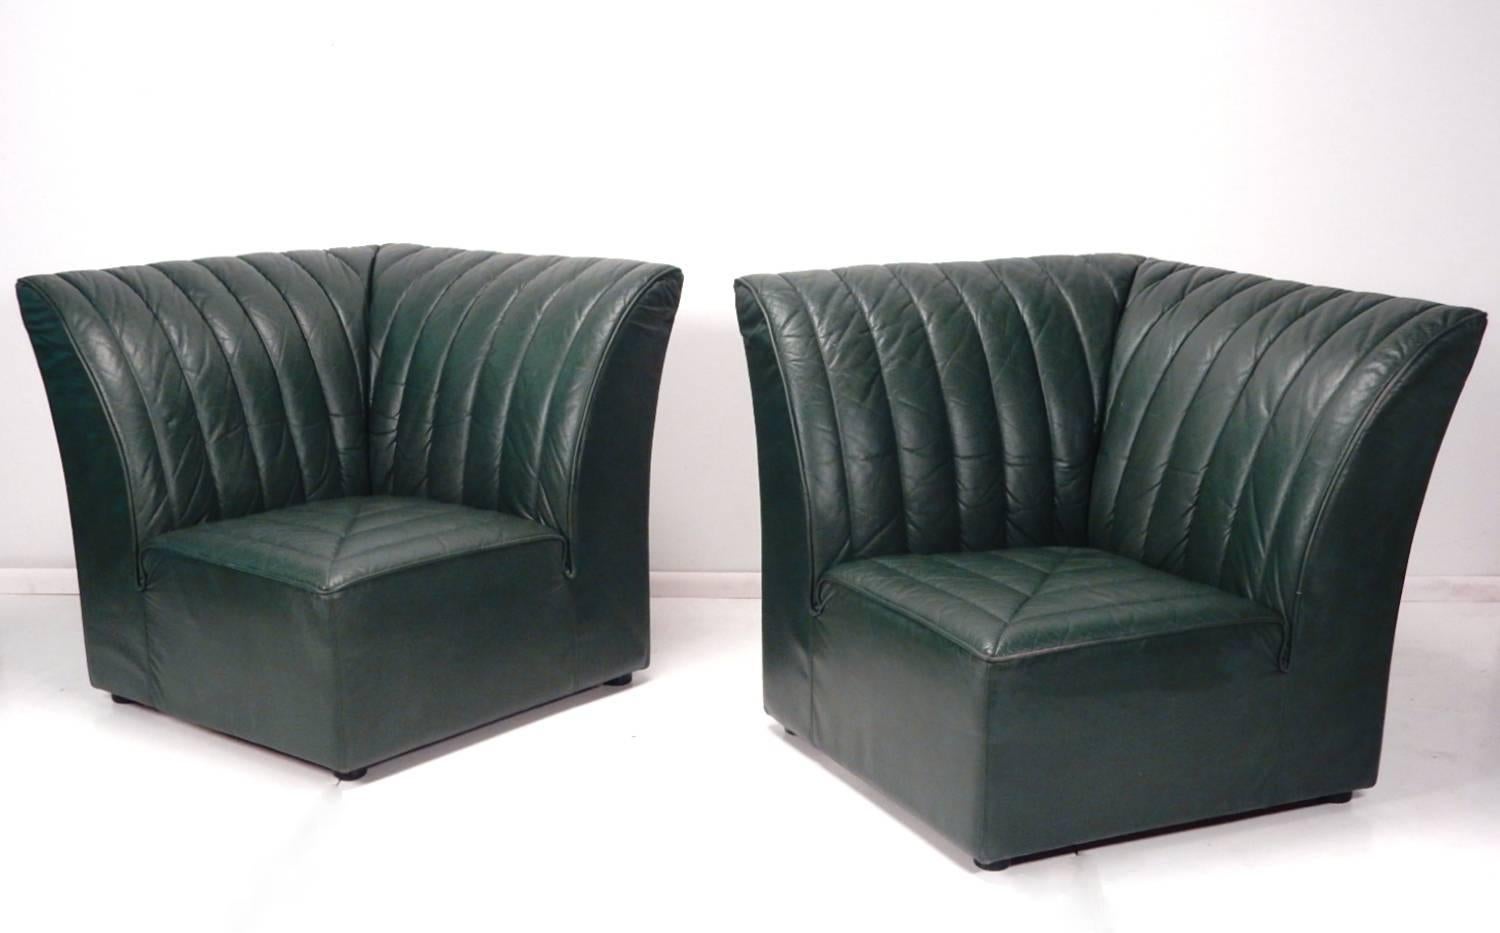 Spectacular leather settee designed by Guido Faleschini for Pace Collection by i4 Mariani.
Gorgeous hunter green premium leather.
Can be separated for use as a pair of club chairs or styled with a table between.
Underside strap to secure them